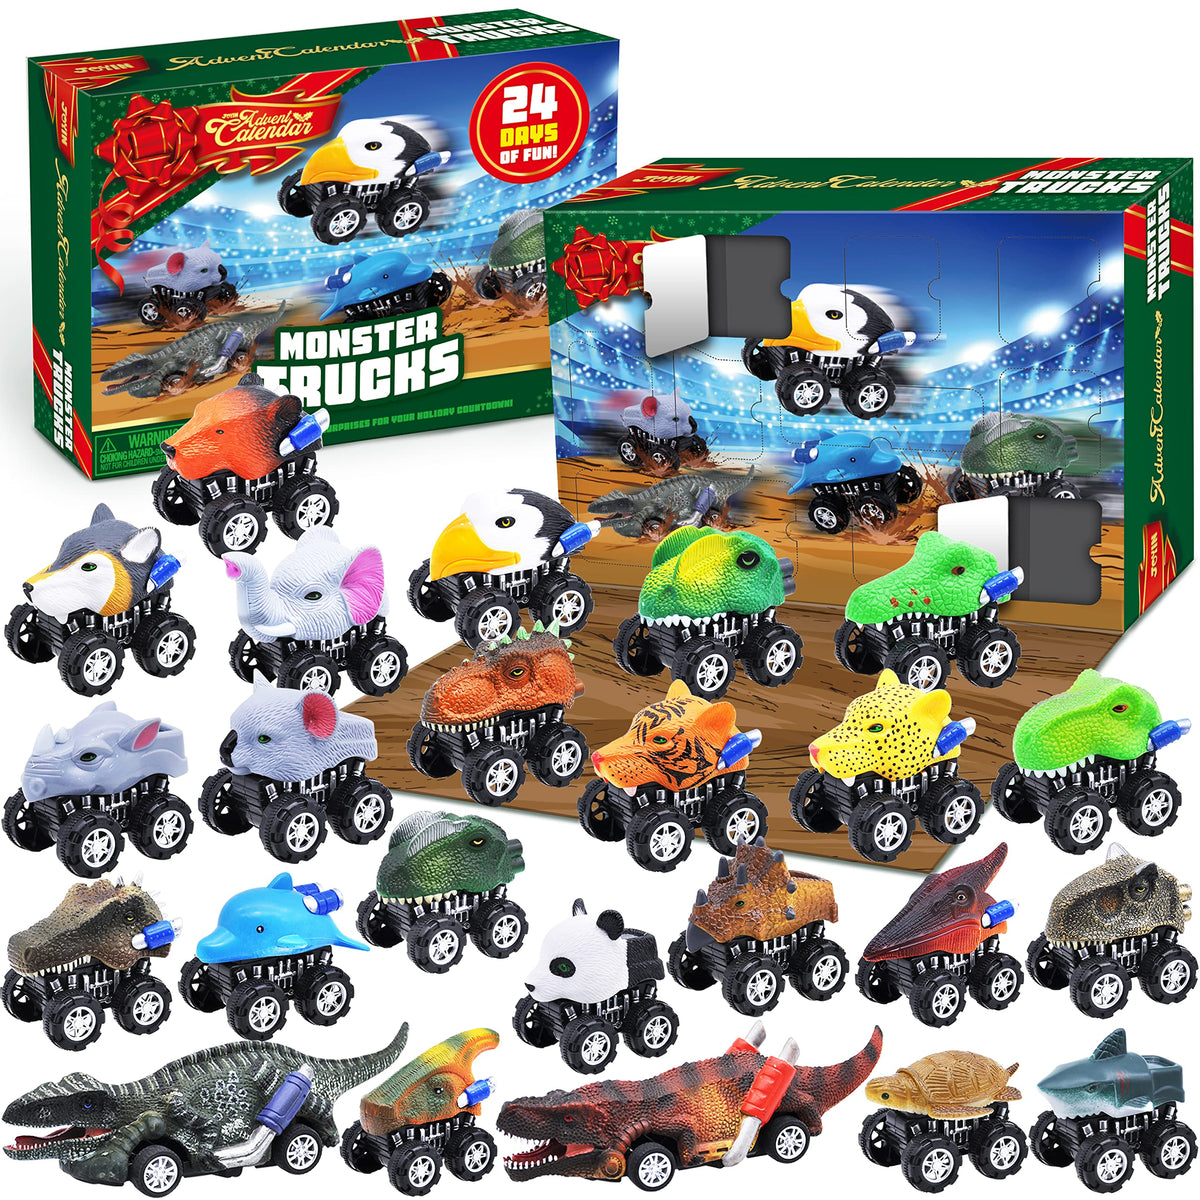 https://www.joyinusa.shop/wp-content/uploads/1692/00/visit-our-website-to-see-the-newest-the-christmas-advent-calendar-with-monster-truck-toys-set-joyin-unique-designs-that-you-cant-find-in-any-other-place_0.jpg